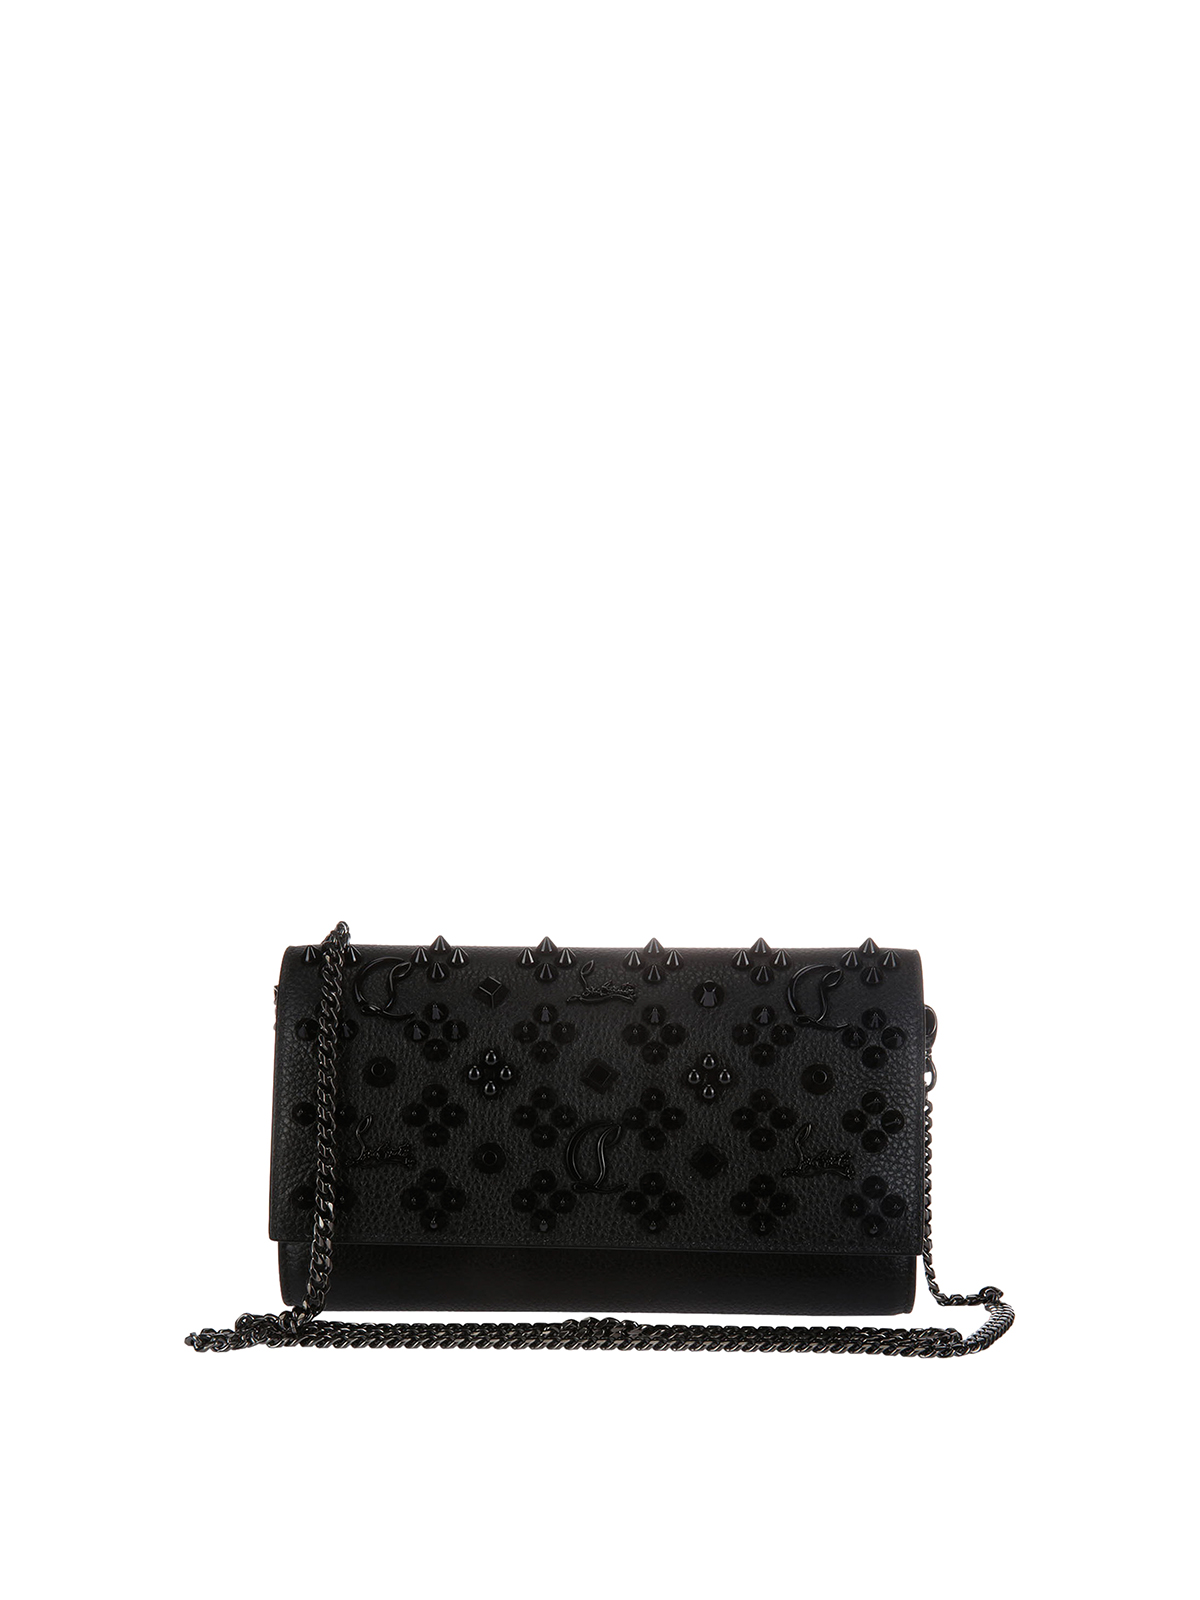 Christian Louboutin Paloma Leather Wallet In Black